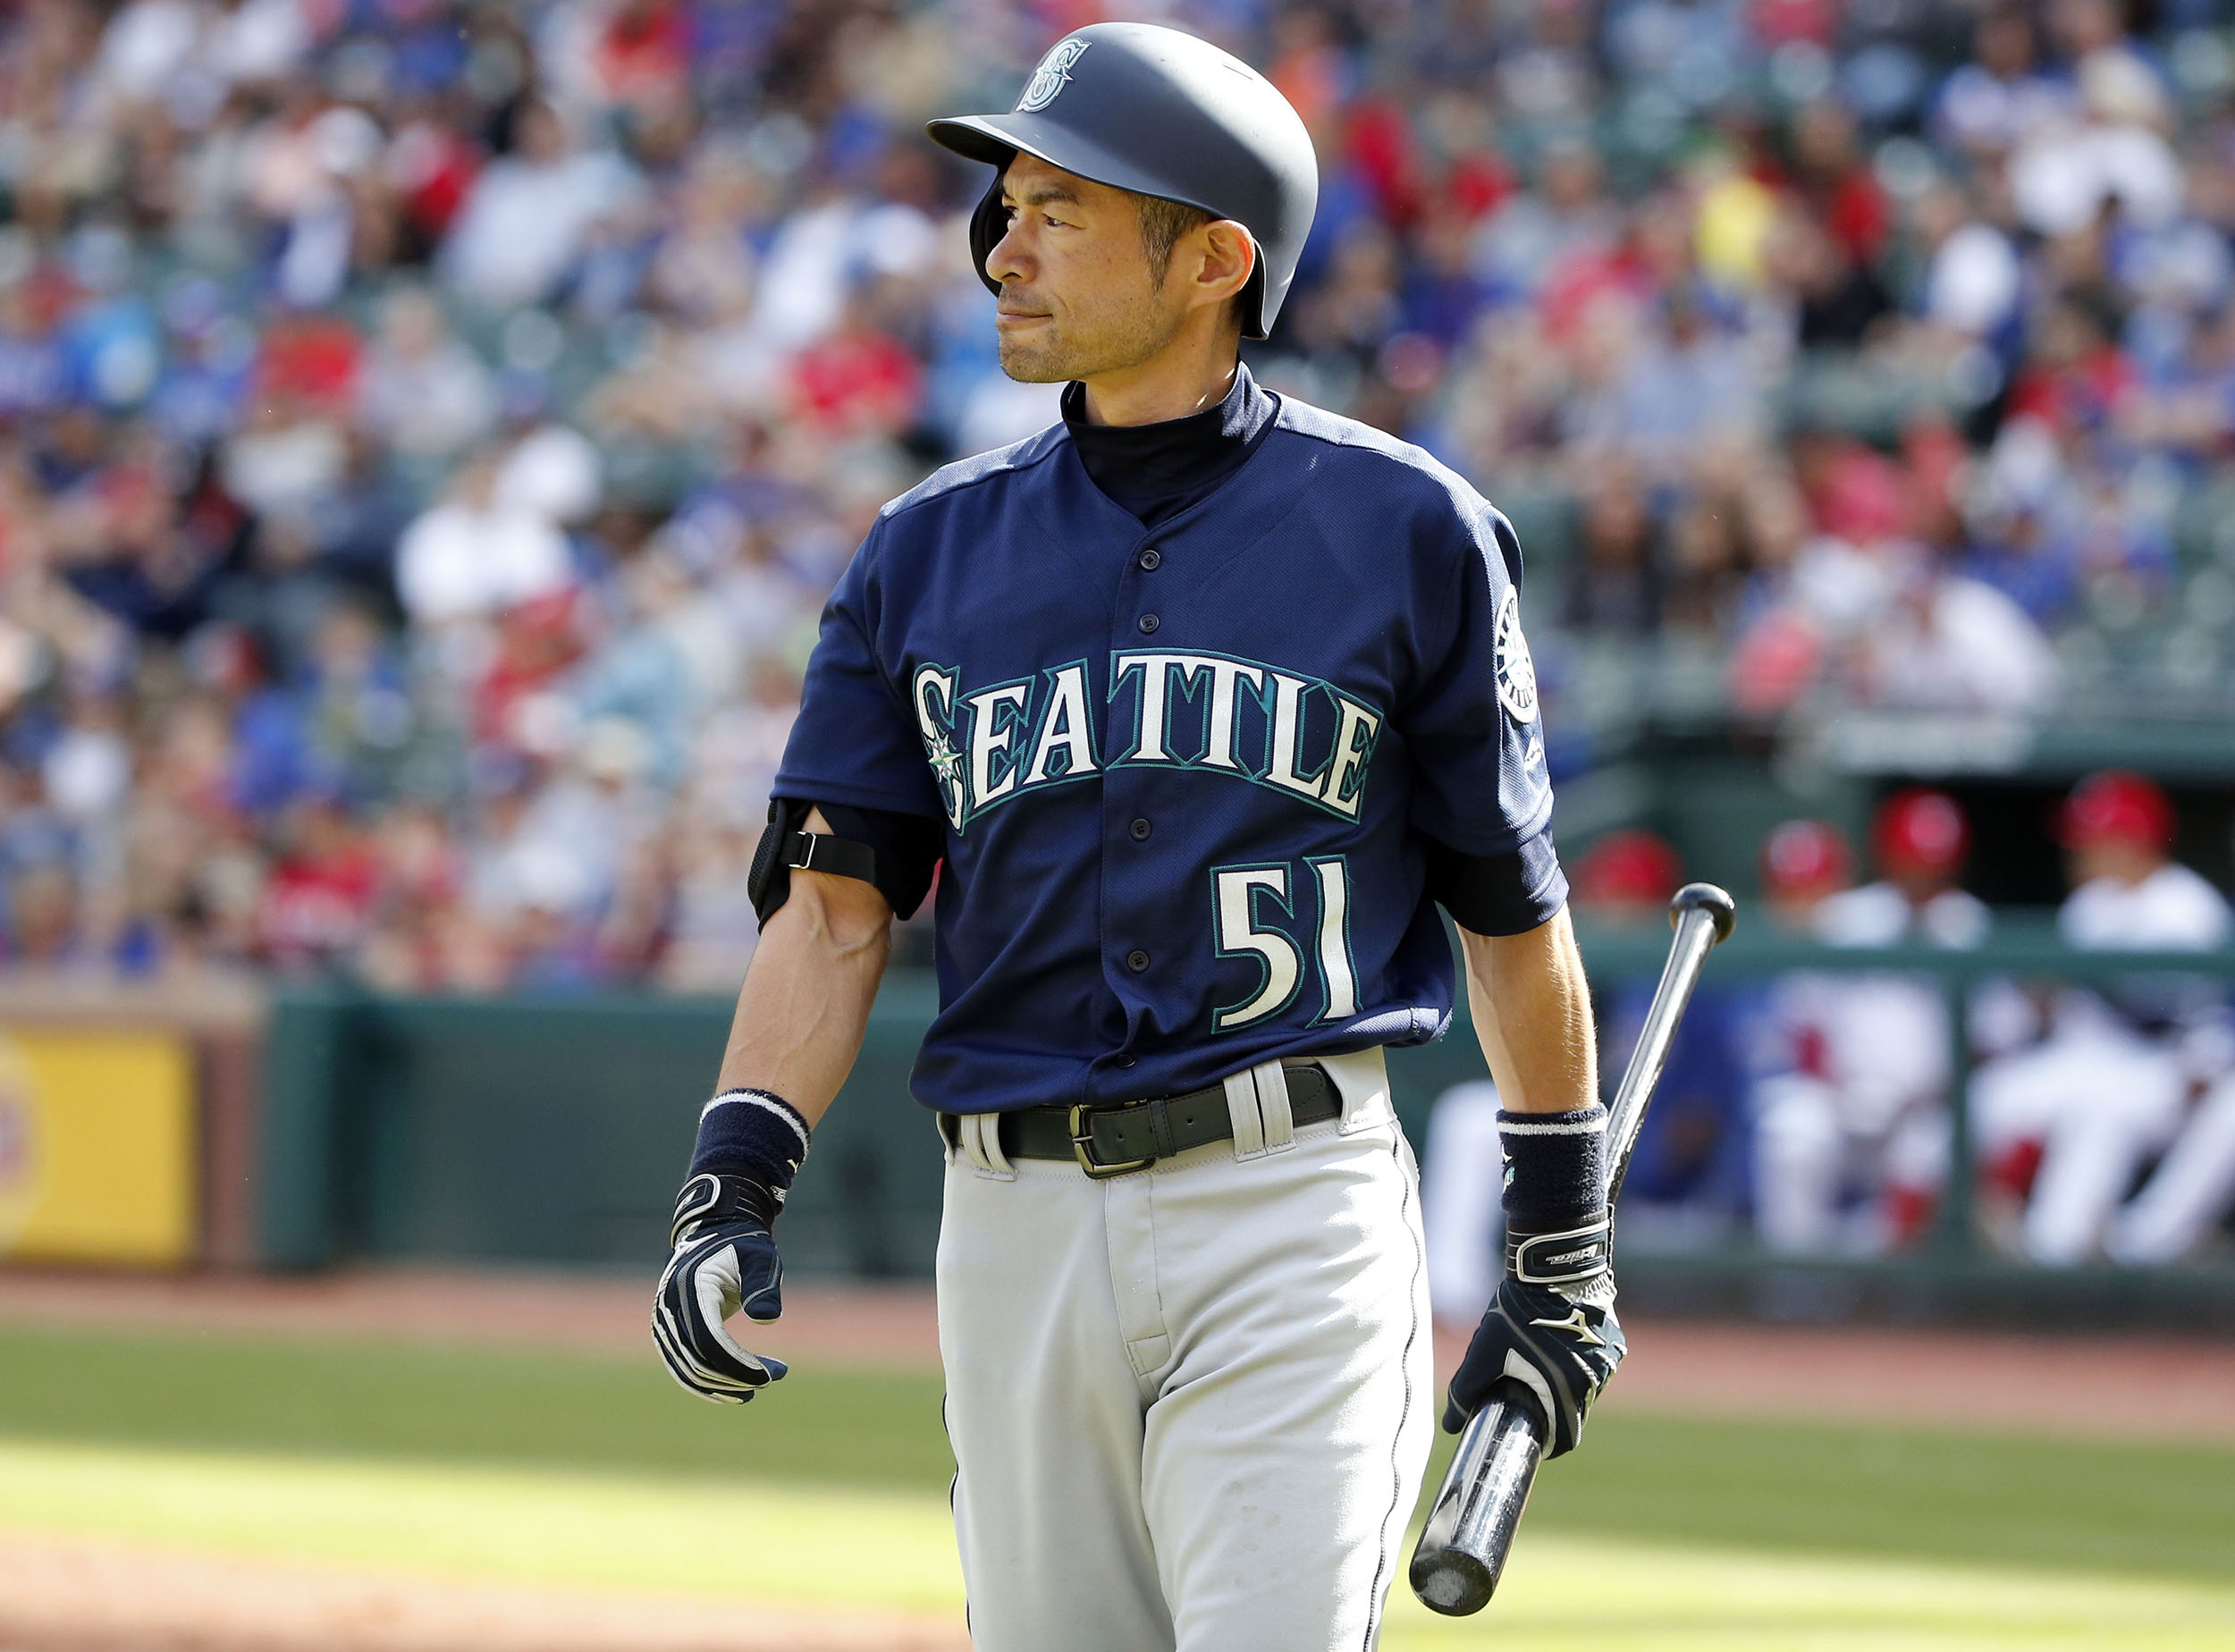 Seattle Mariners right fielder Ichiro Suzuki (51) walks back to the dugout after striking out against the Texas Rangers during the ninth inning of a baseball game Sunday, April 22, 2018, in Arlington, Texas. The Rangers defeated the Mariners 7-4. (AP Photo/Michael Ainsworth)